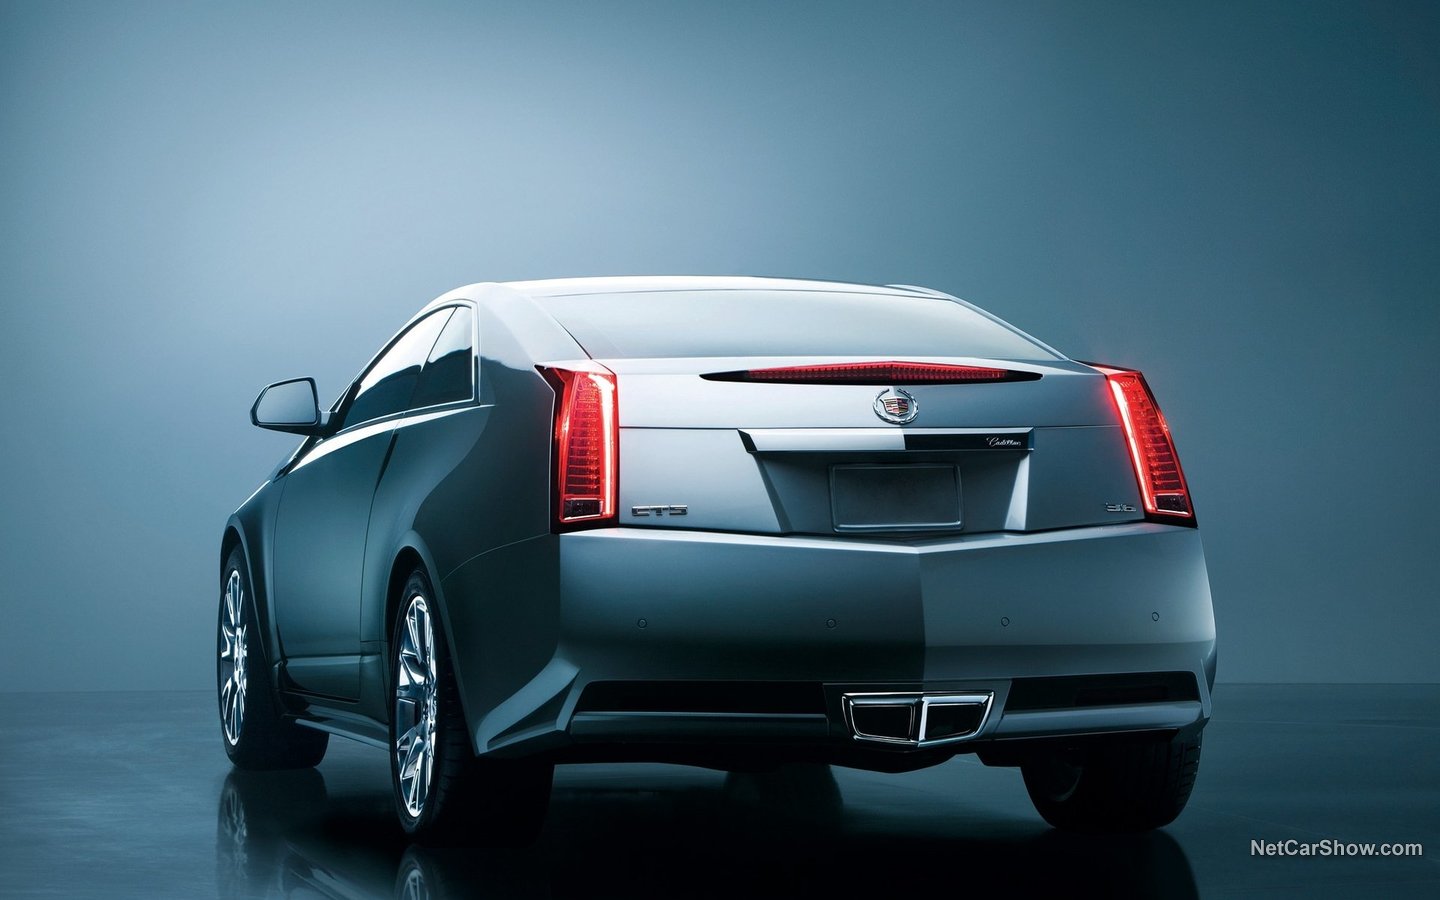 Cadillac CTS Coupe 2011 5c7dee74